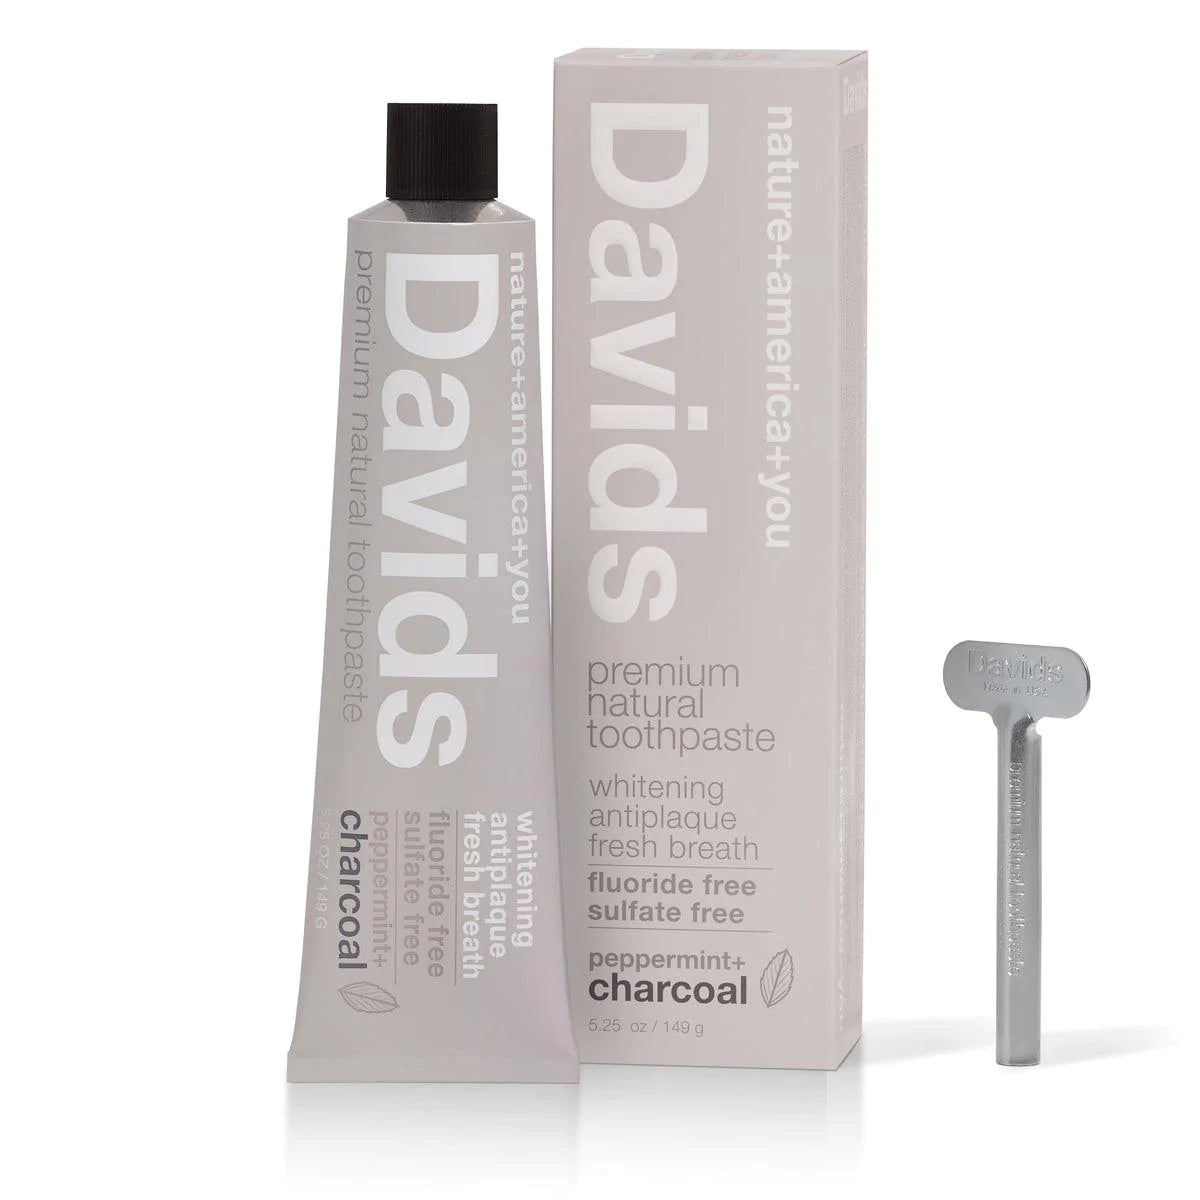 Davids Toothpaste | charcoal+peppermint